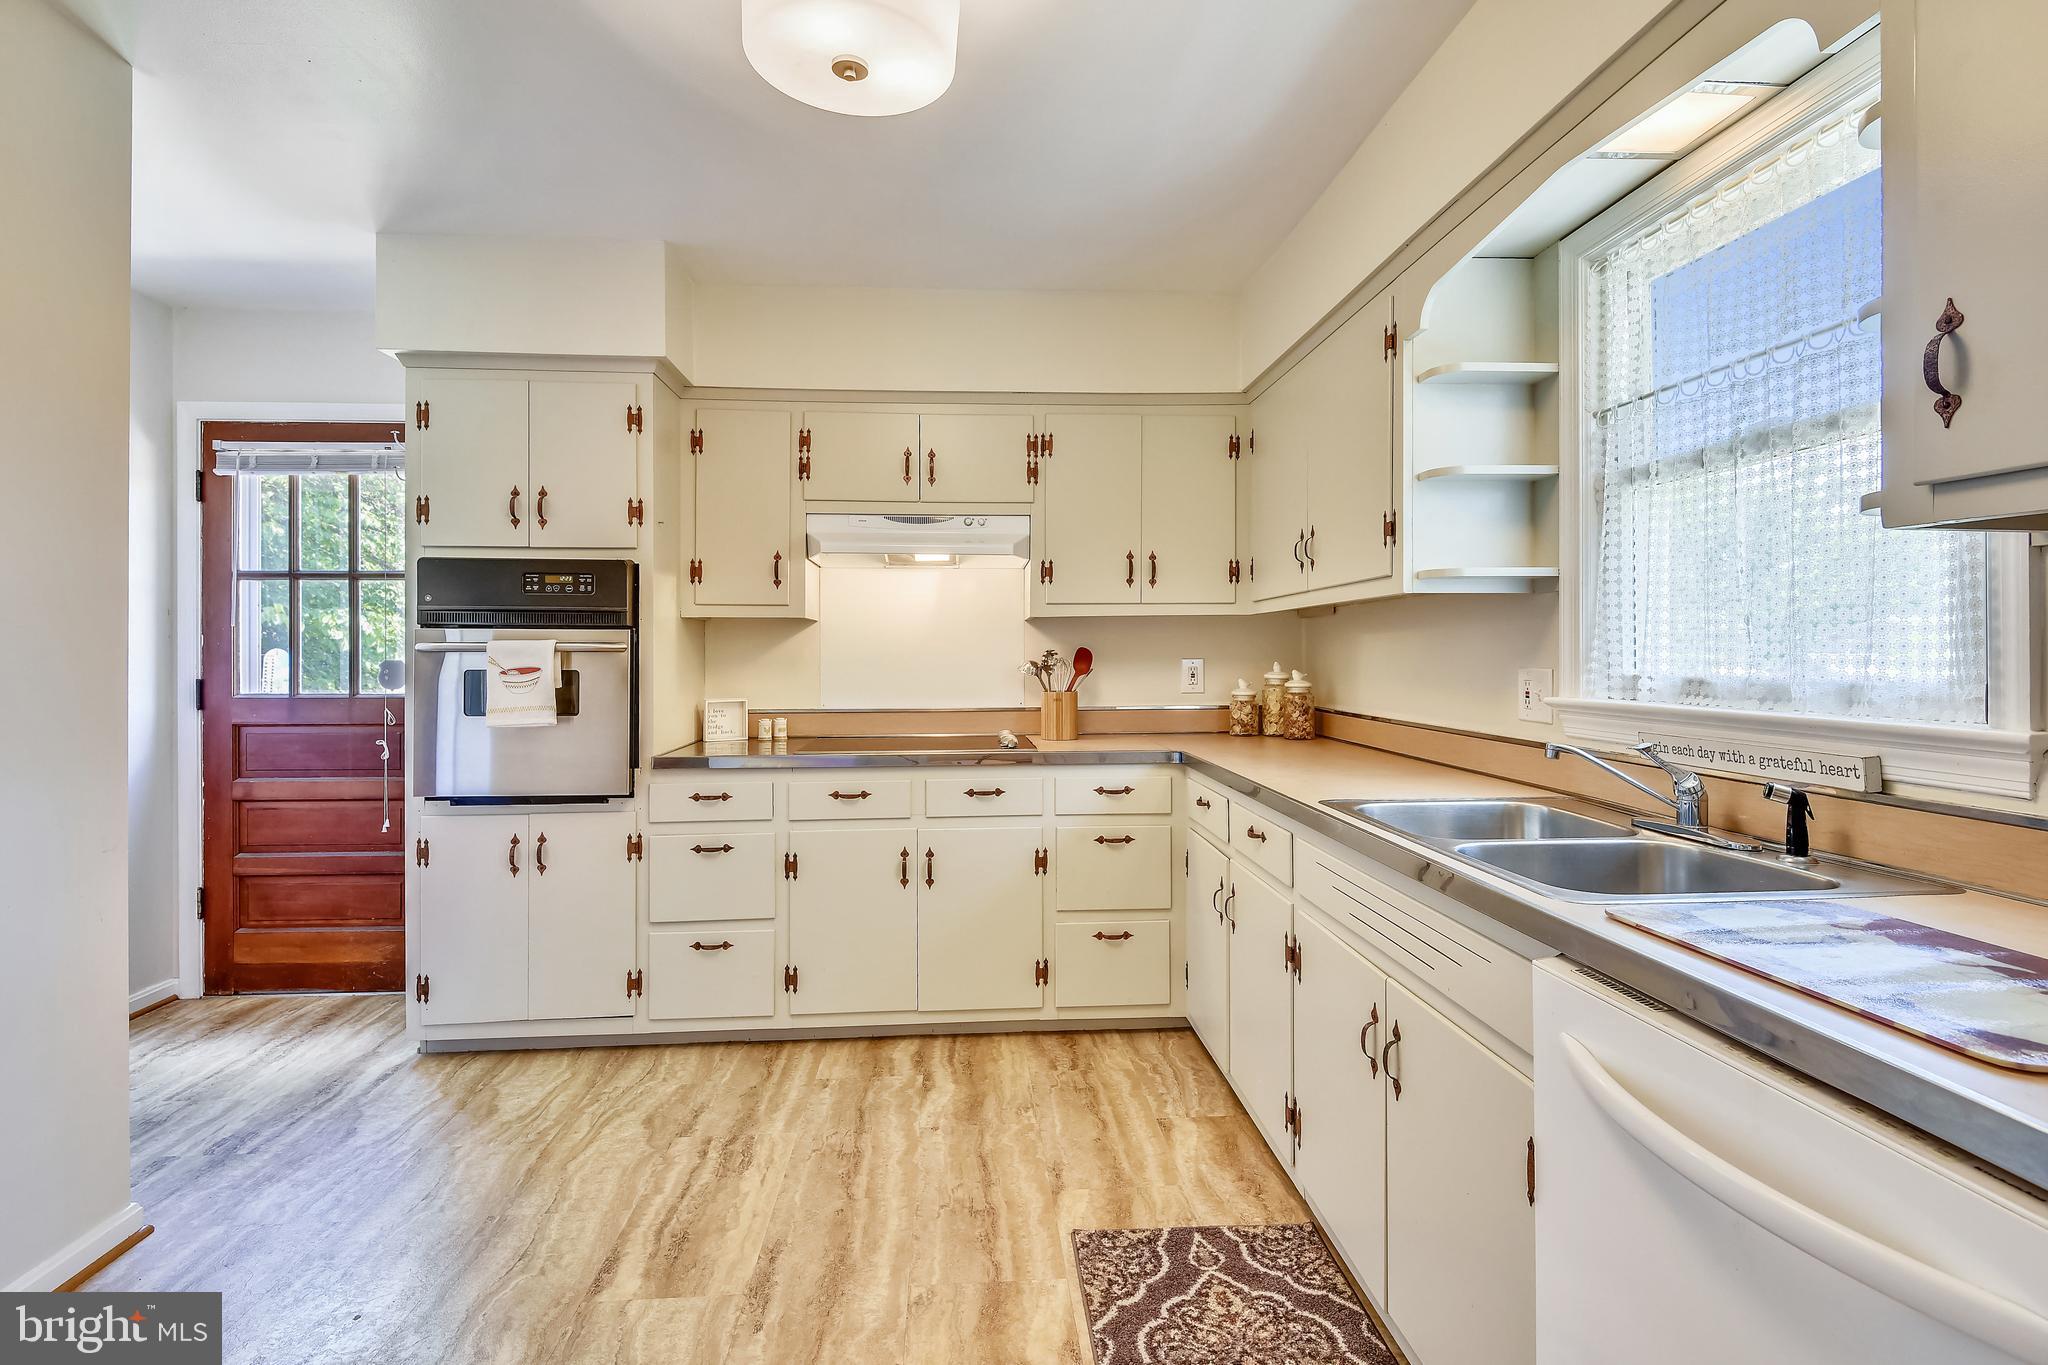 a kitchen with cabinets wooden floor and stainless steel appliances